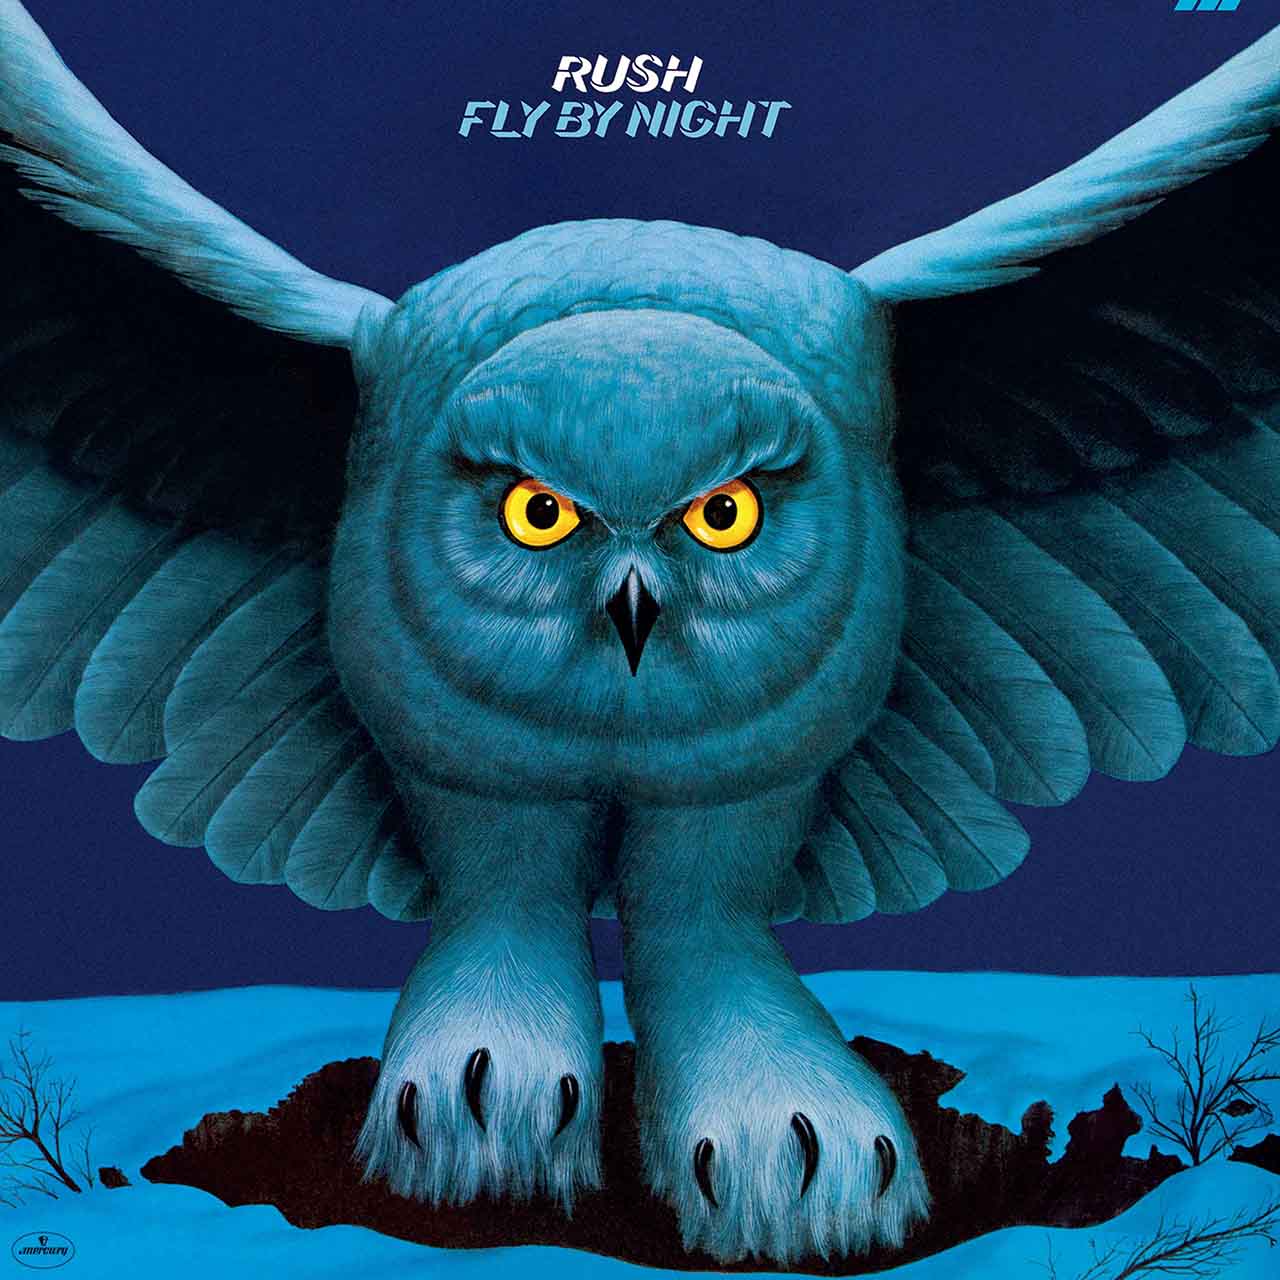 Fly by Night': The Album That Pointed To Rush's Future